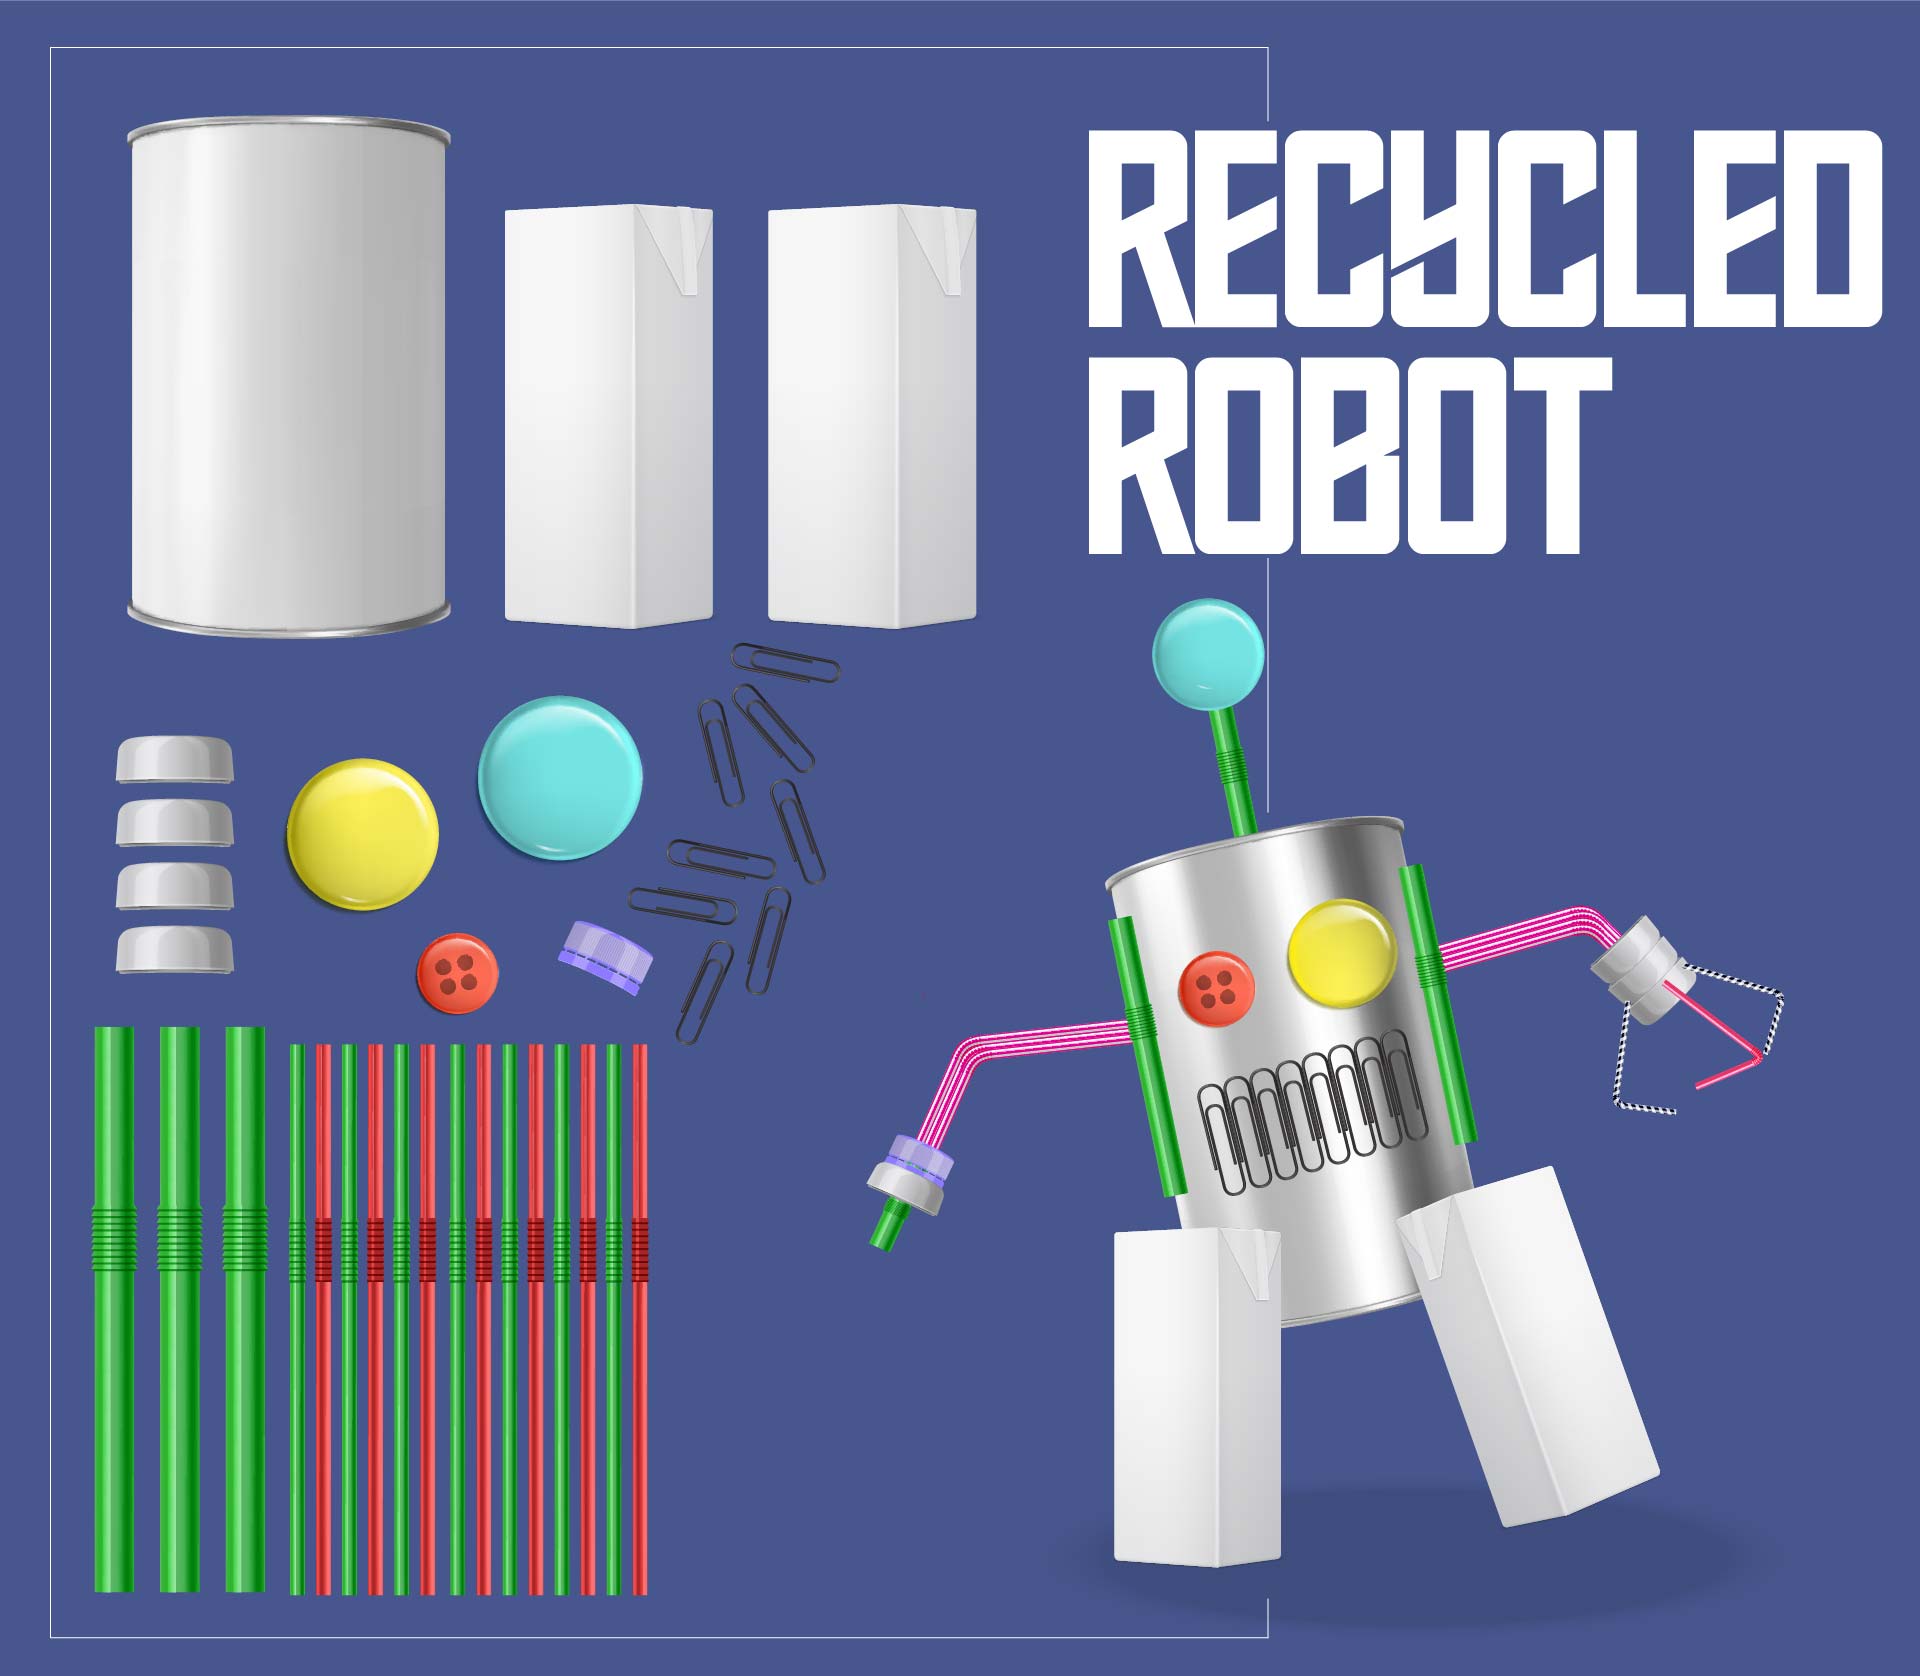 Easy Recycled Robot Craft Kids